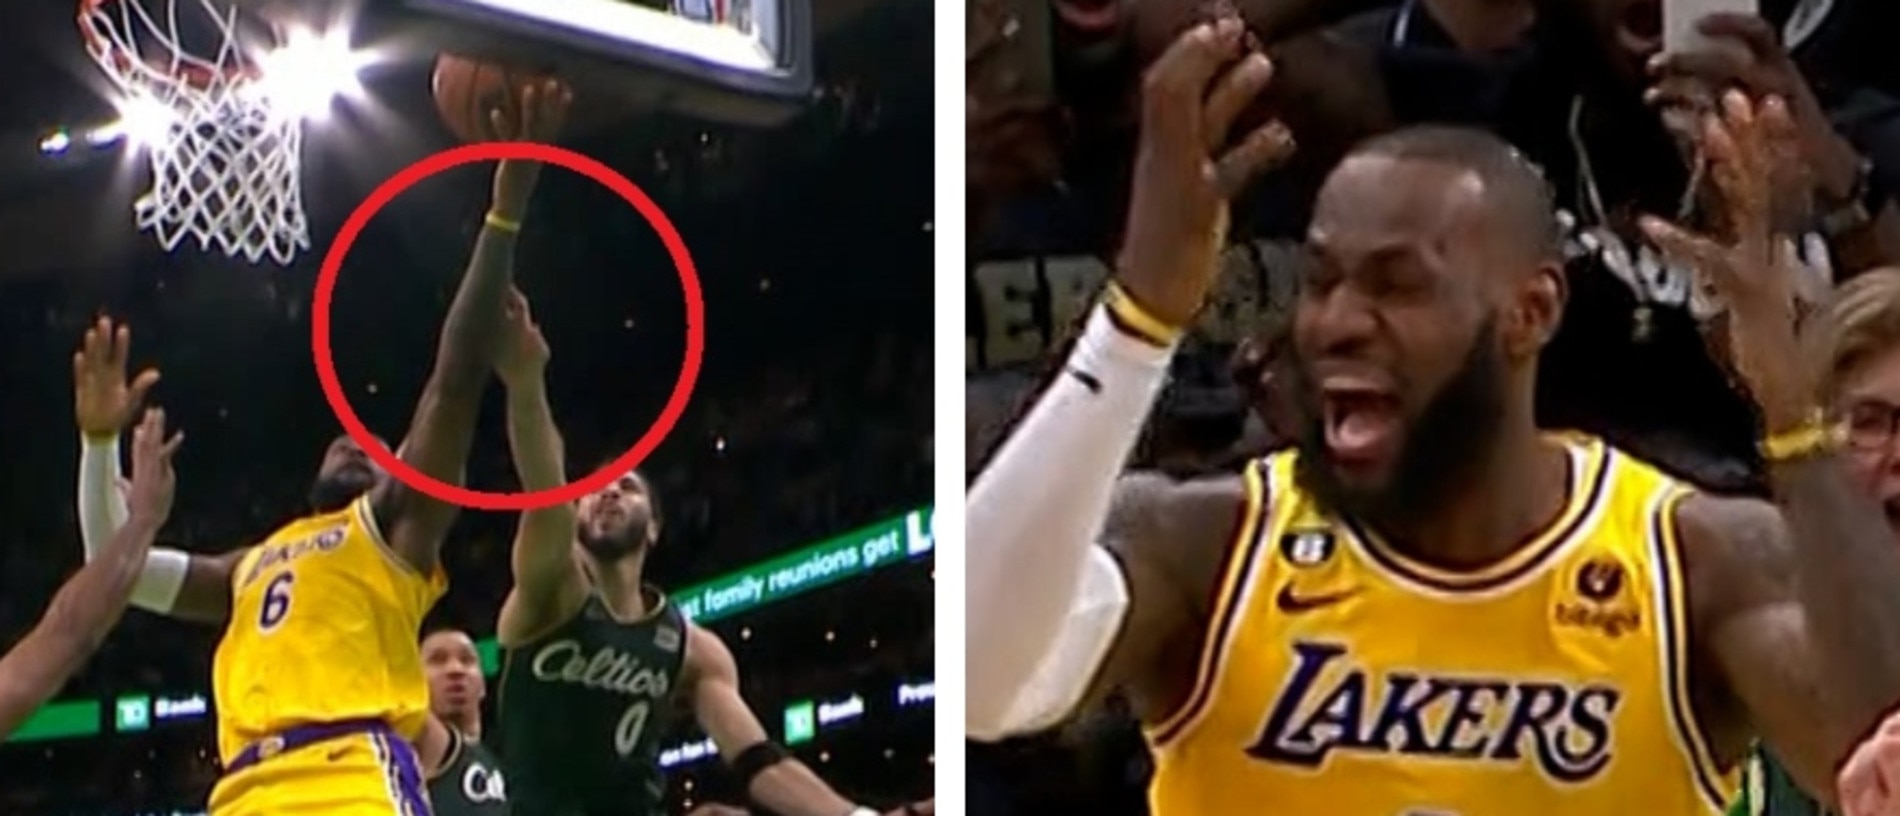 NBA 2023 news missed LeBron James referee foul call, LA Lakers vs Boston Celtics, no call review rule, reaction, scores, results